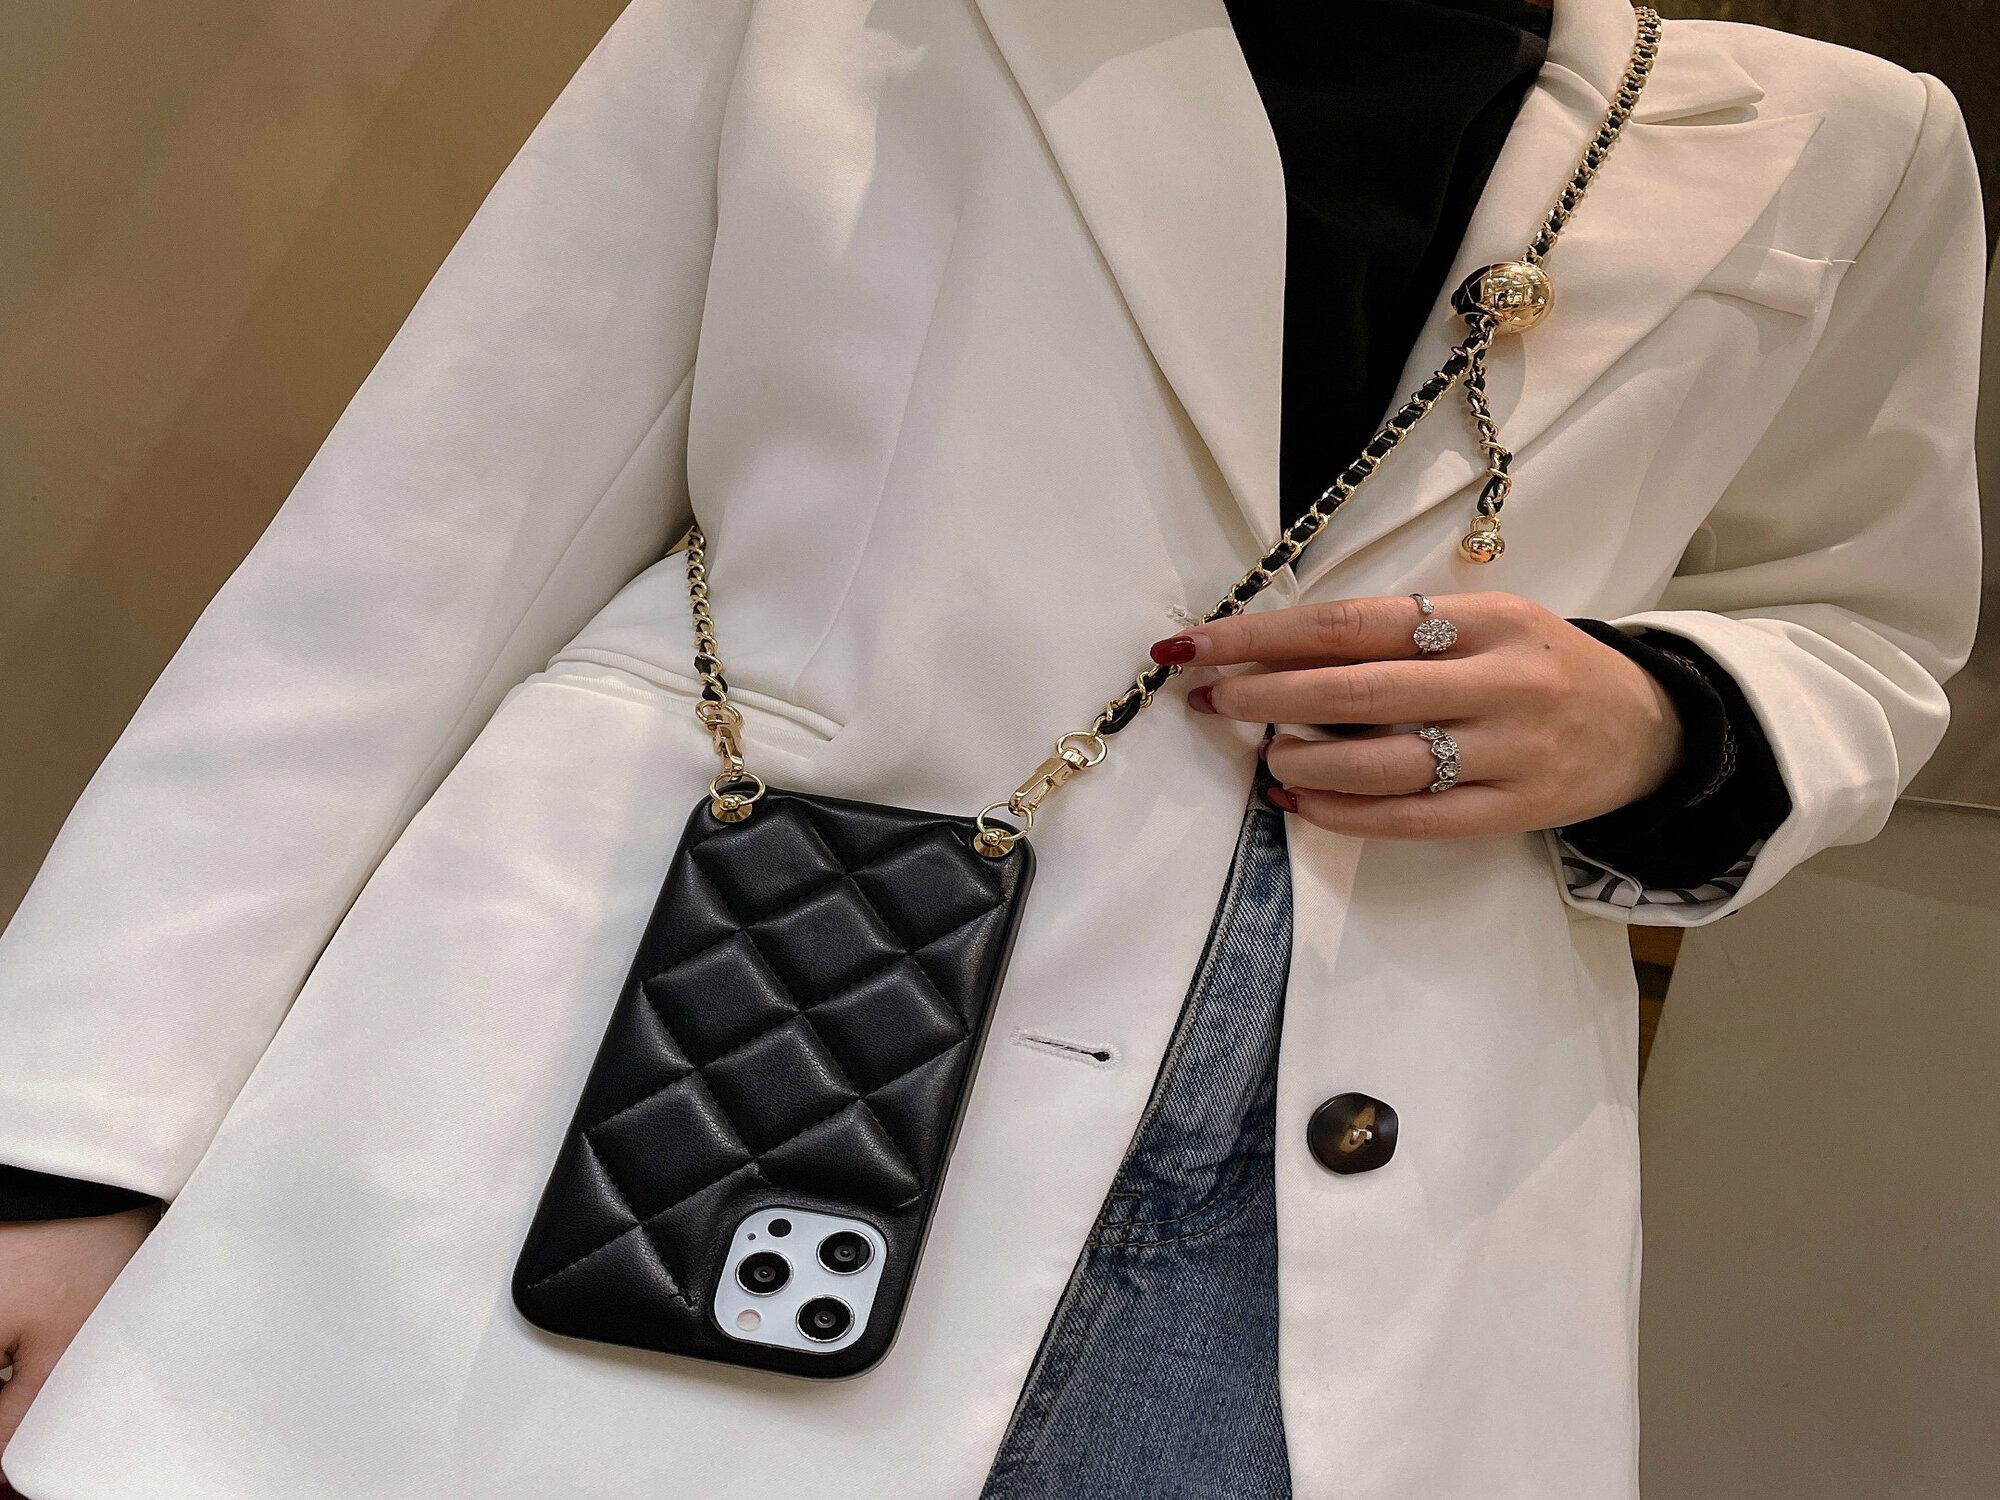 where-can-i-buy-a-chanel-phone-case